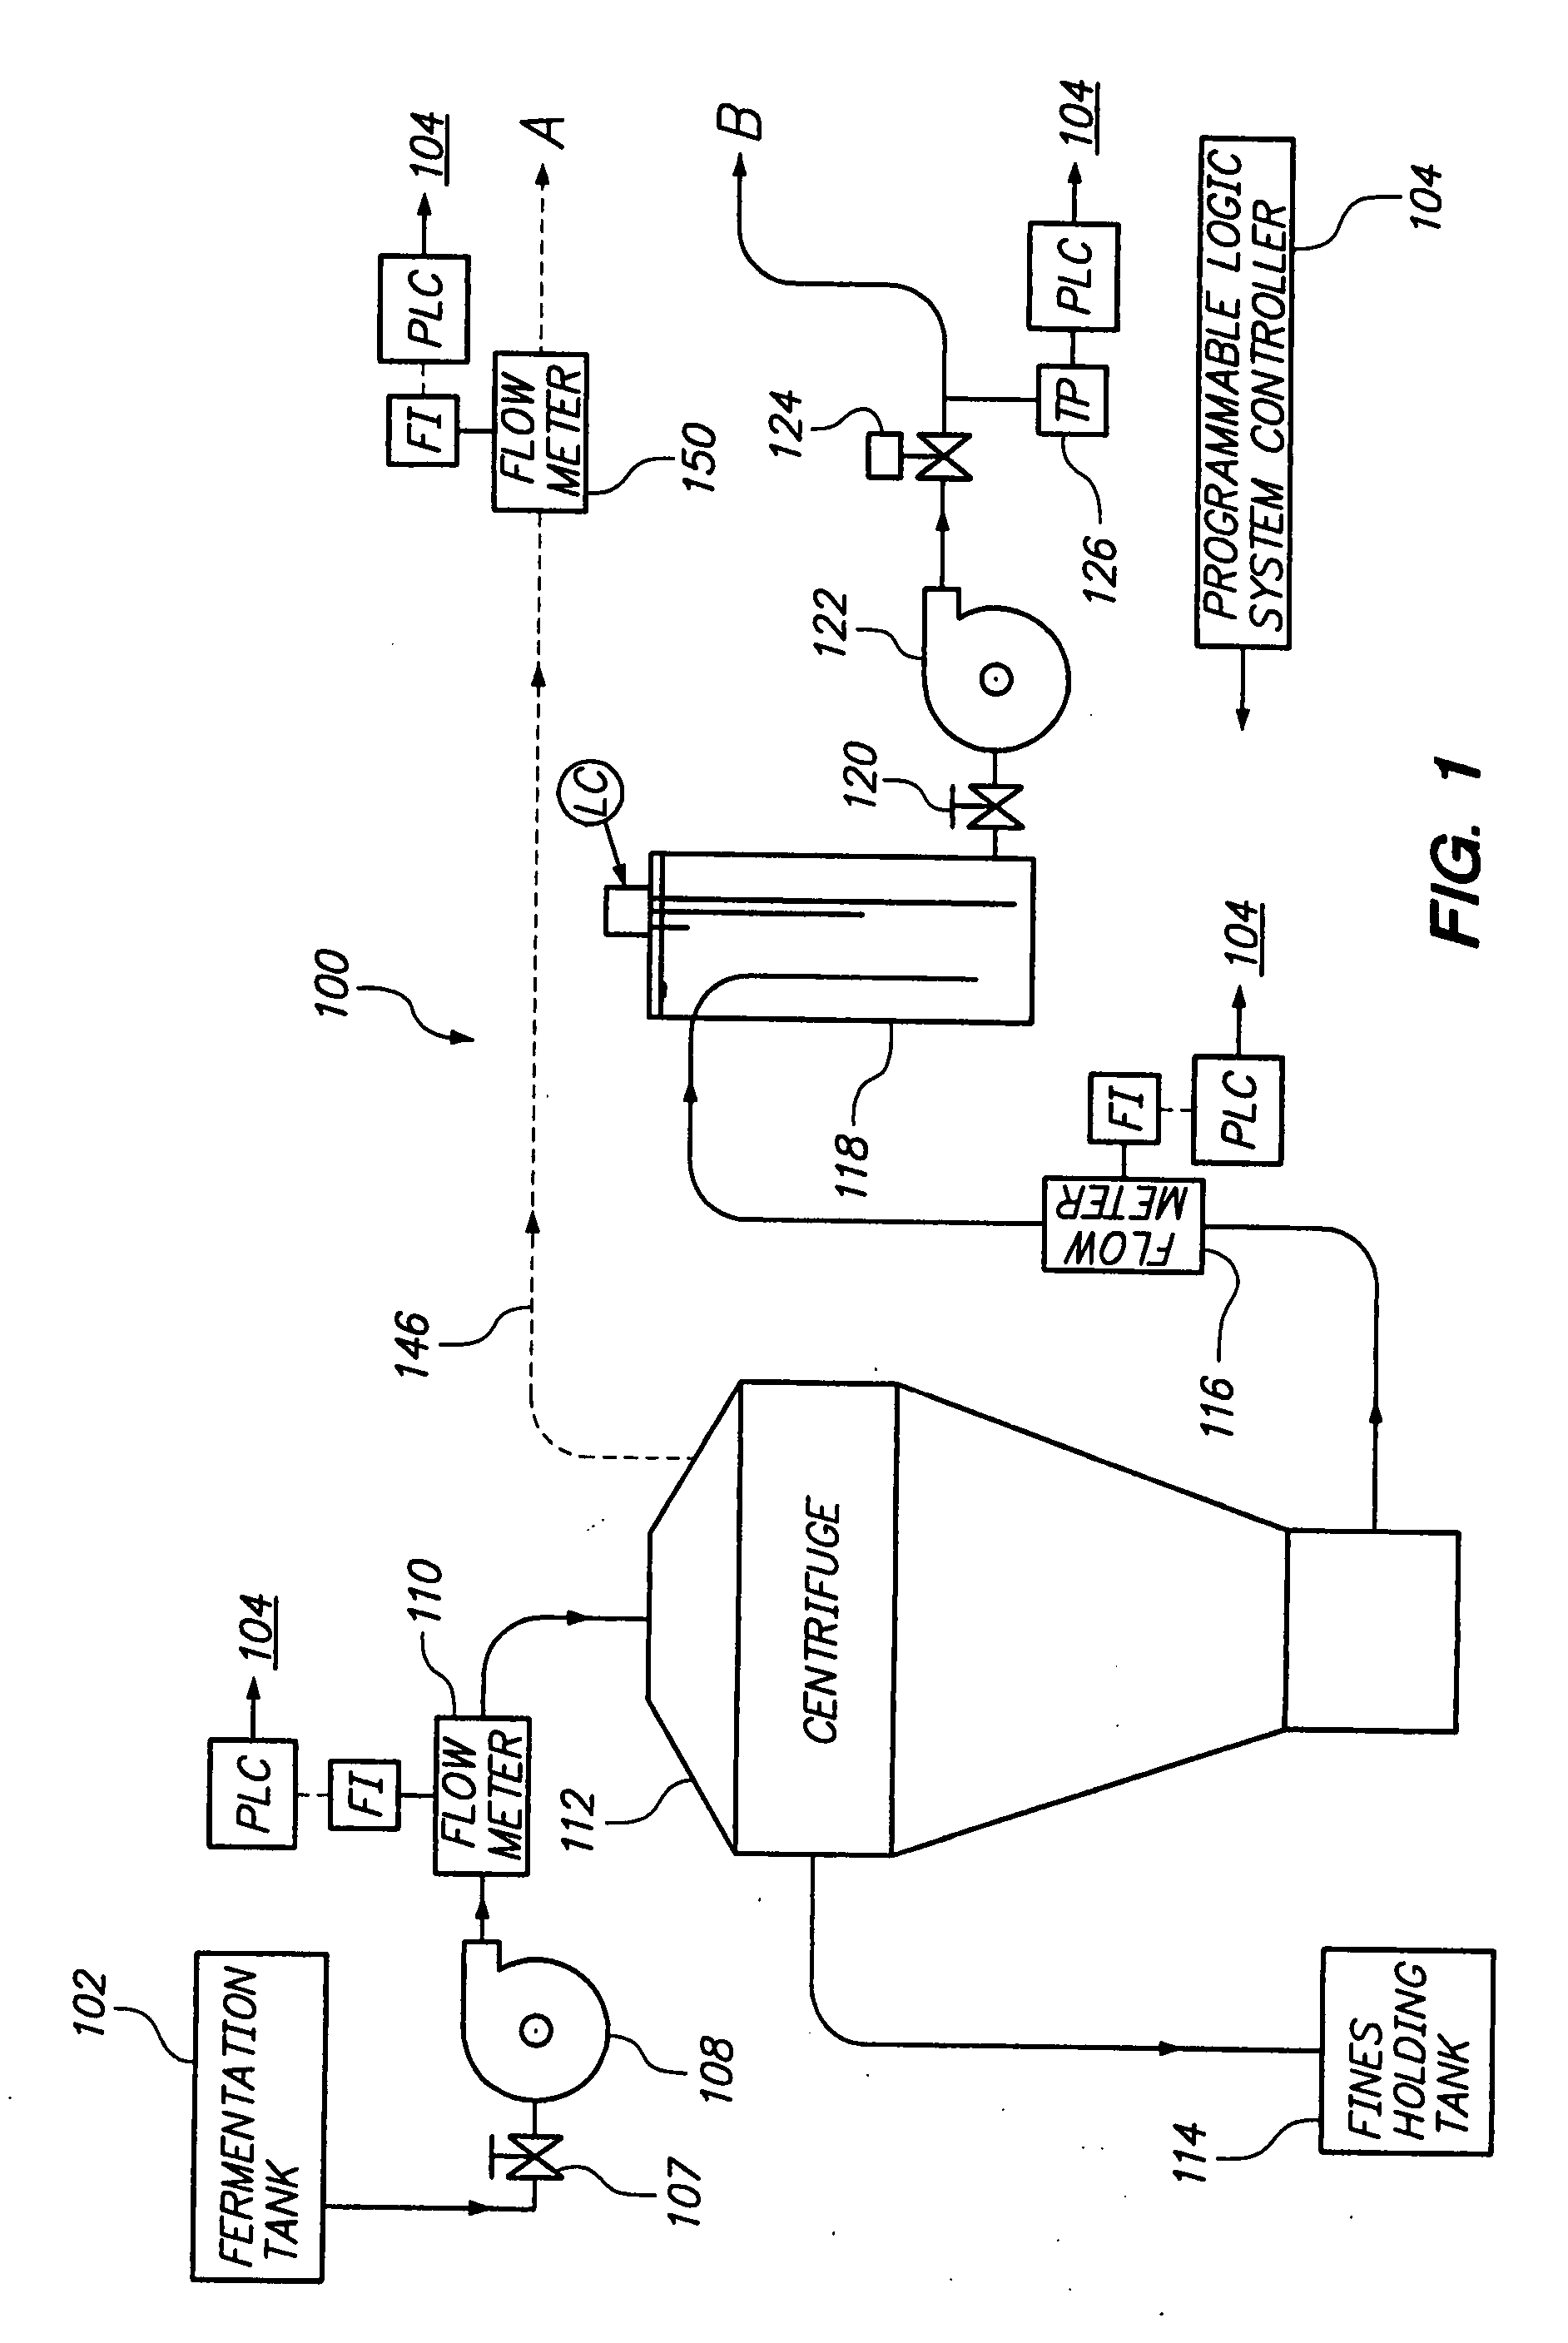 Closed system for continuous removal of ethanol and other compounds